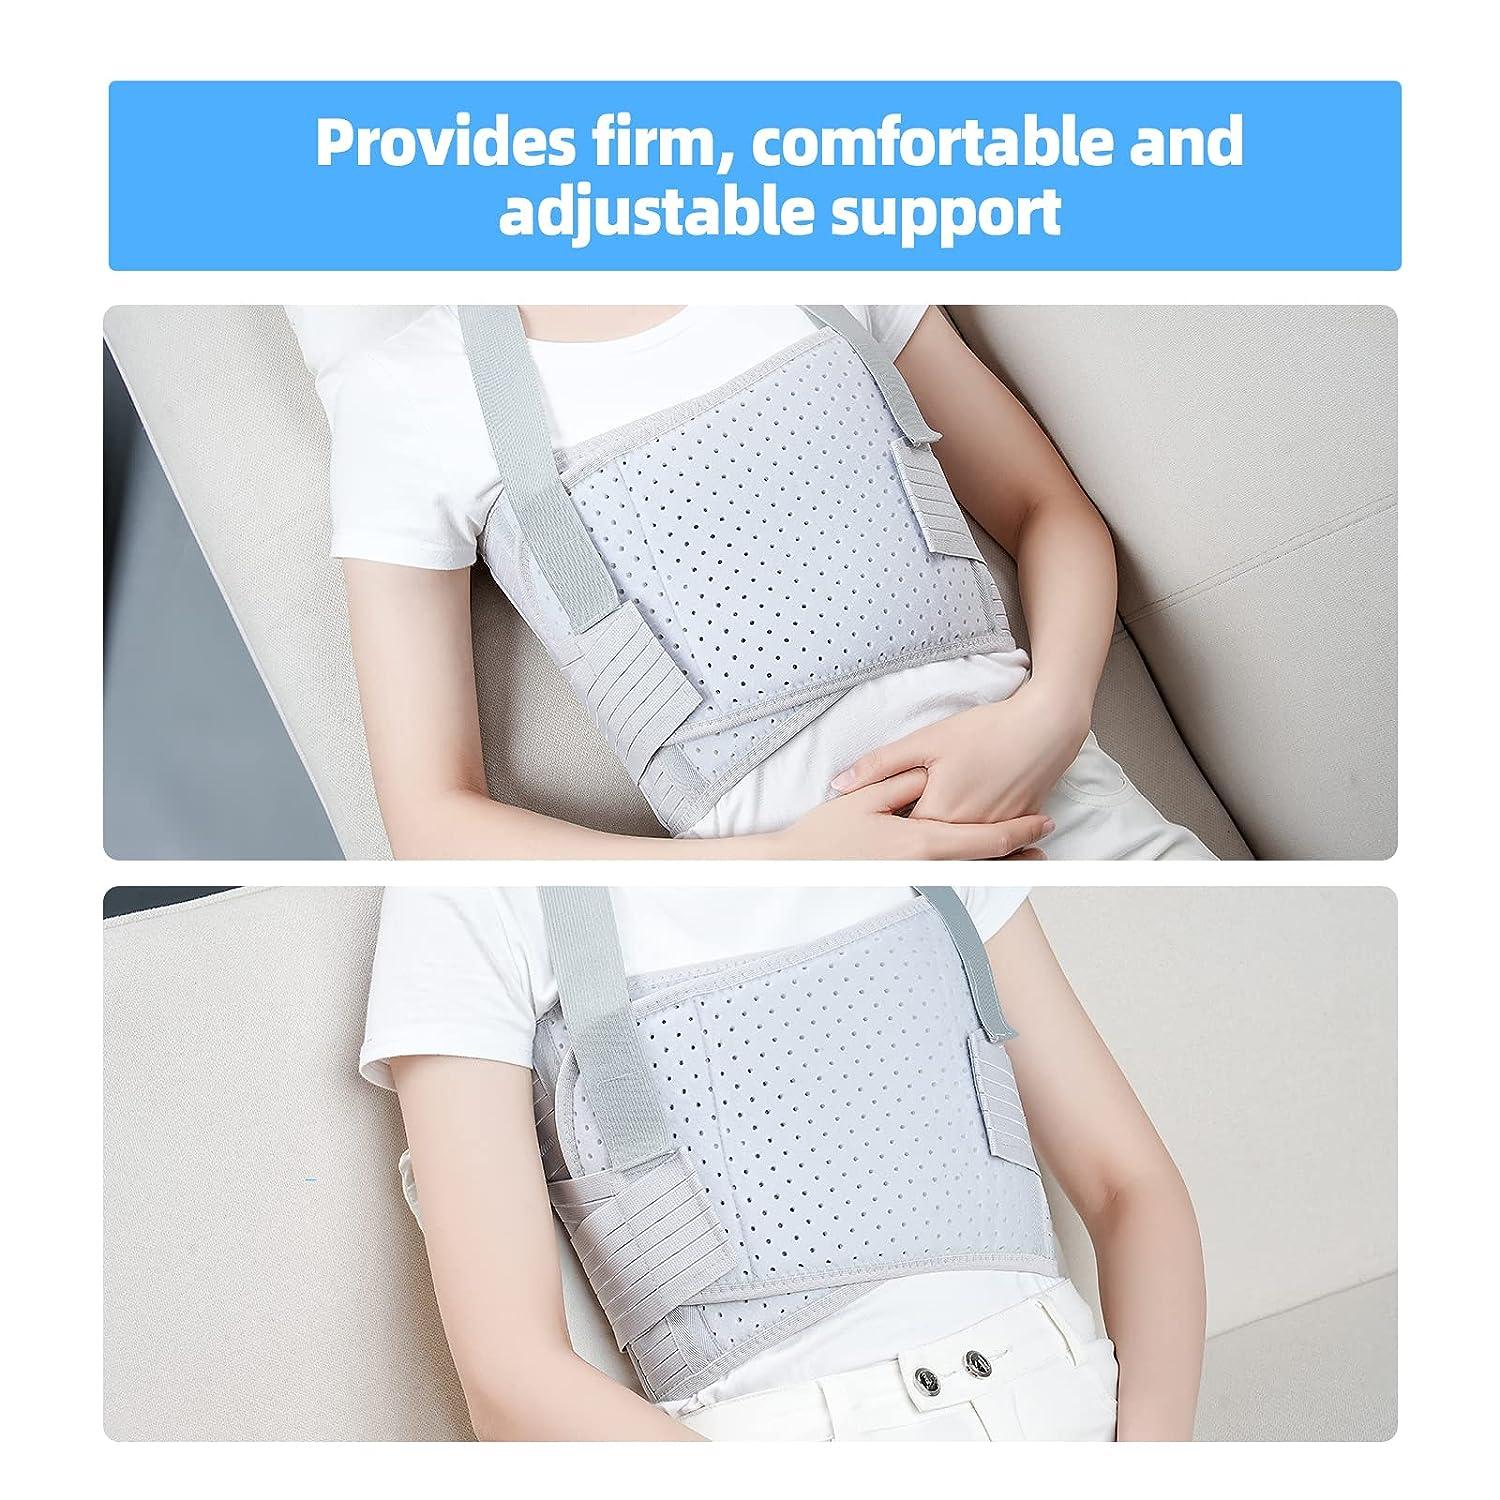  Rib Brace Chest Binder, Rib Belt to Reduce Rib Cage Pain, Chest Compression Support for Rib Muscle Injuries, Bruised Ribs